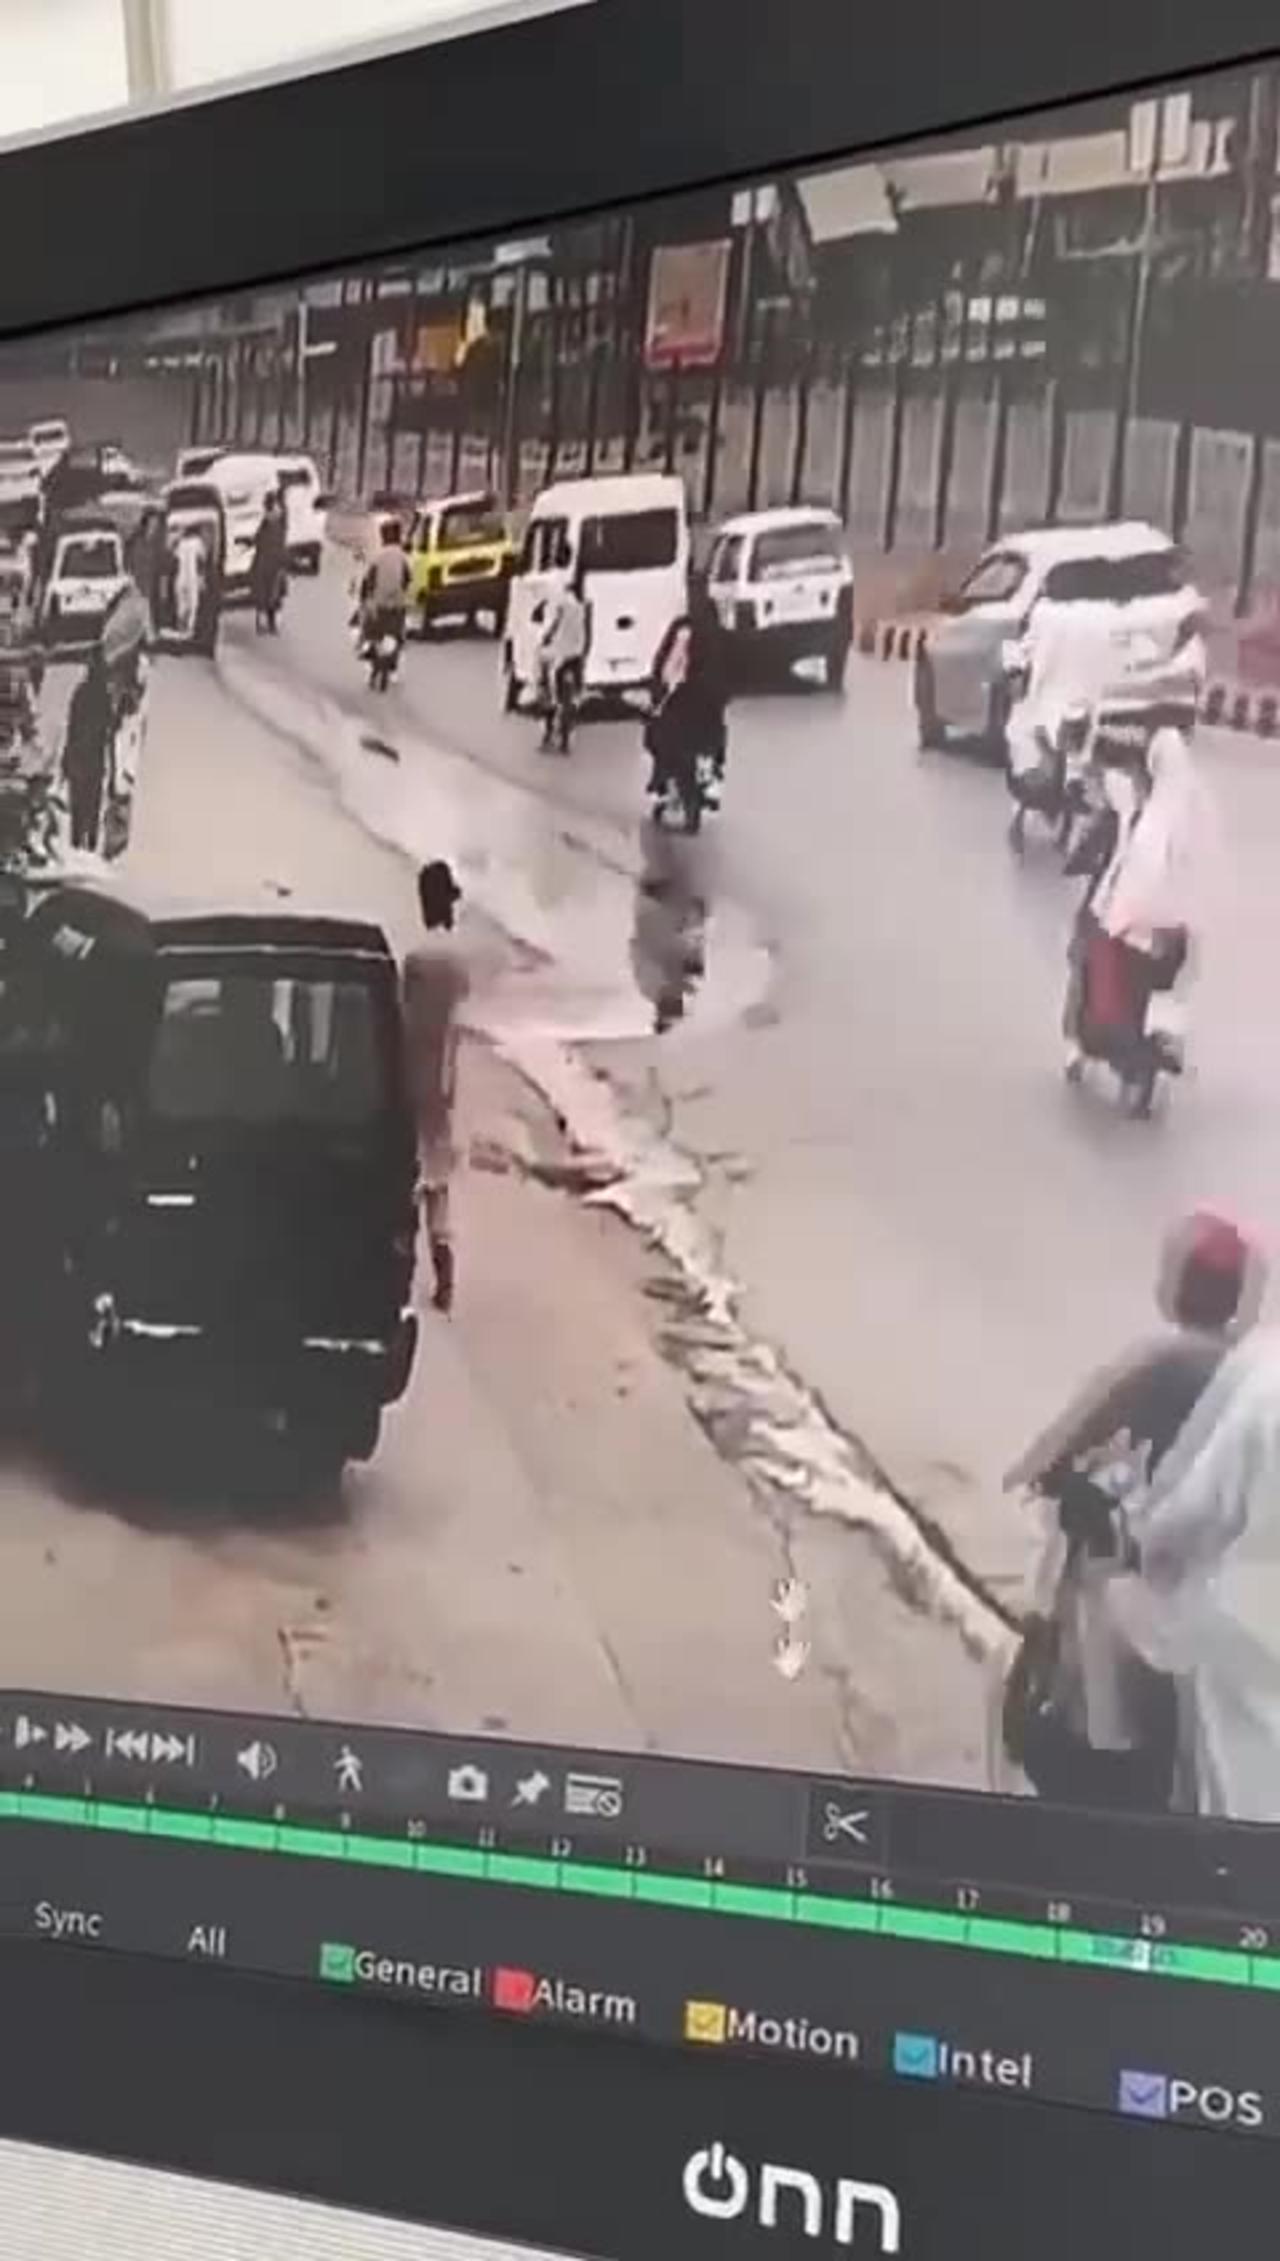 Funny Mobile Snatching Scene - CCTV Video